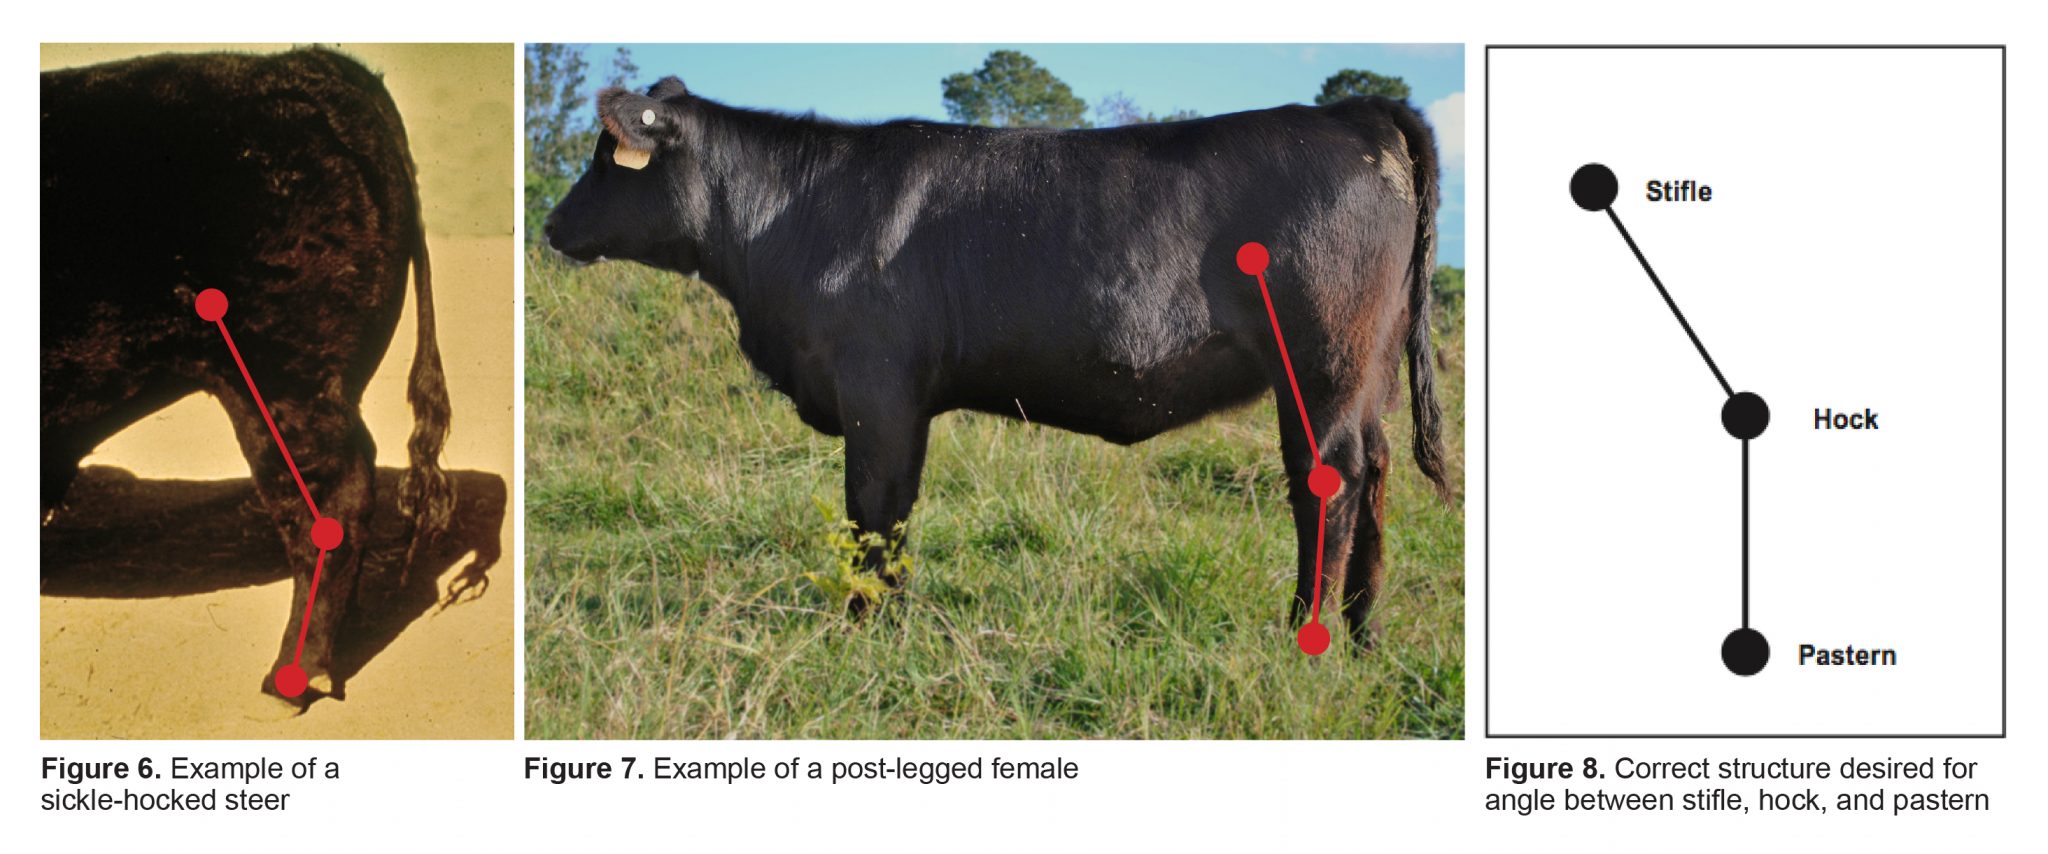 Figure 6. Example of a sickle-hocked steer. Figure 7. Example of a post-legged female. Figure 8. Correct structure desired for angle between stifle, hock, and pastern.